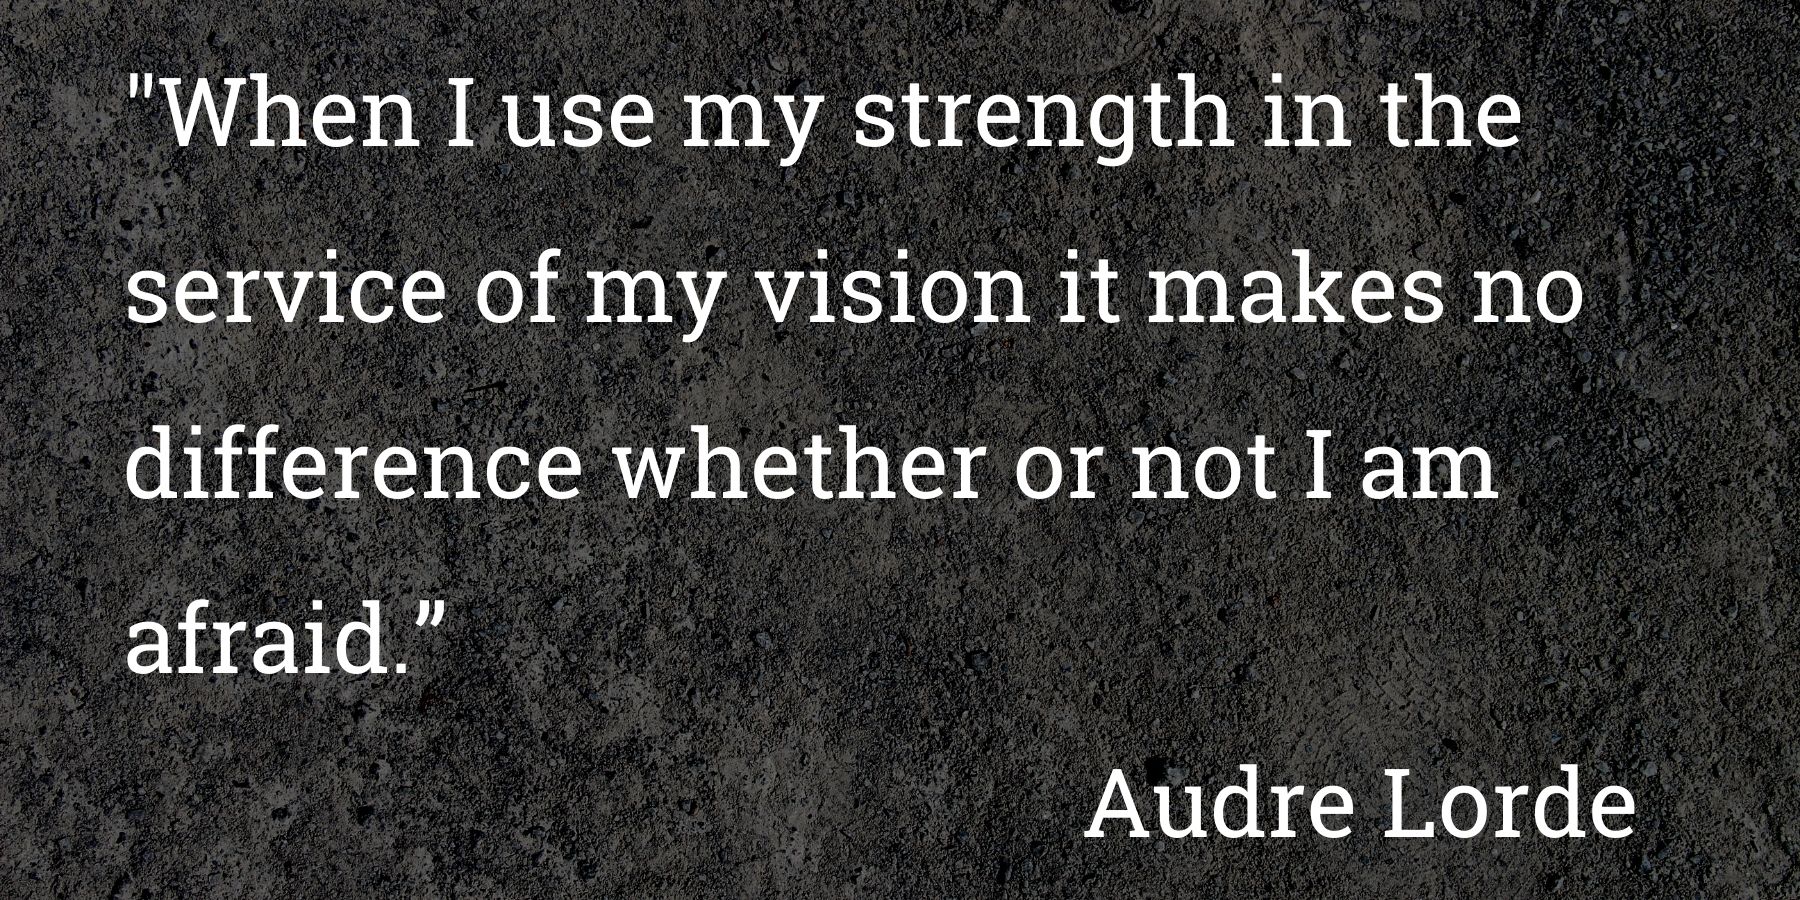 Text of quote by Audre Lorde